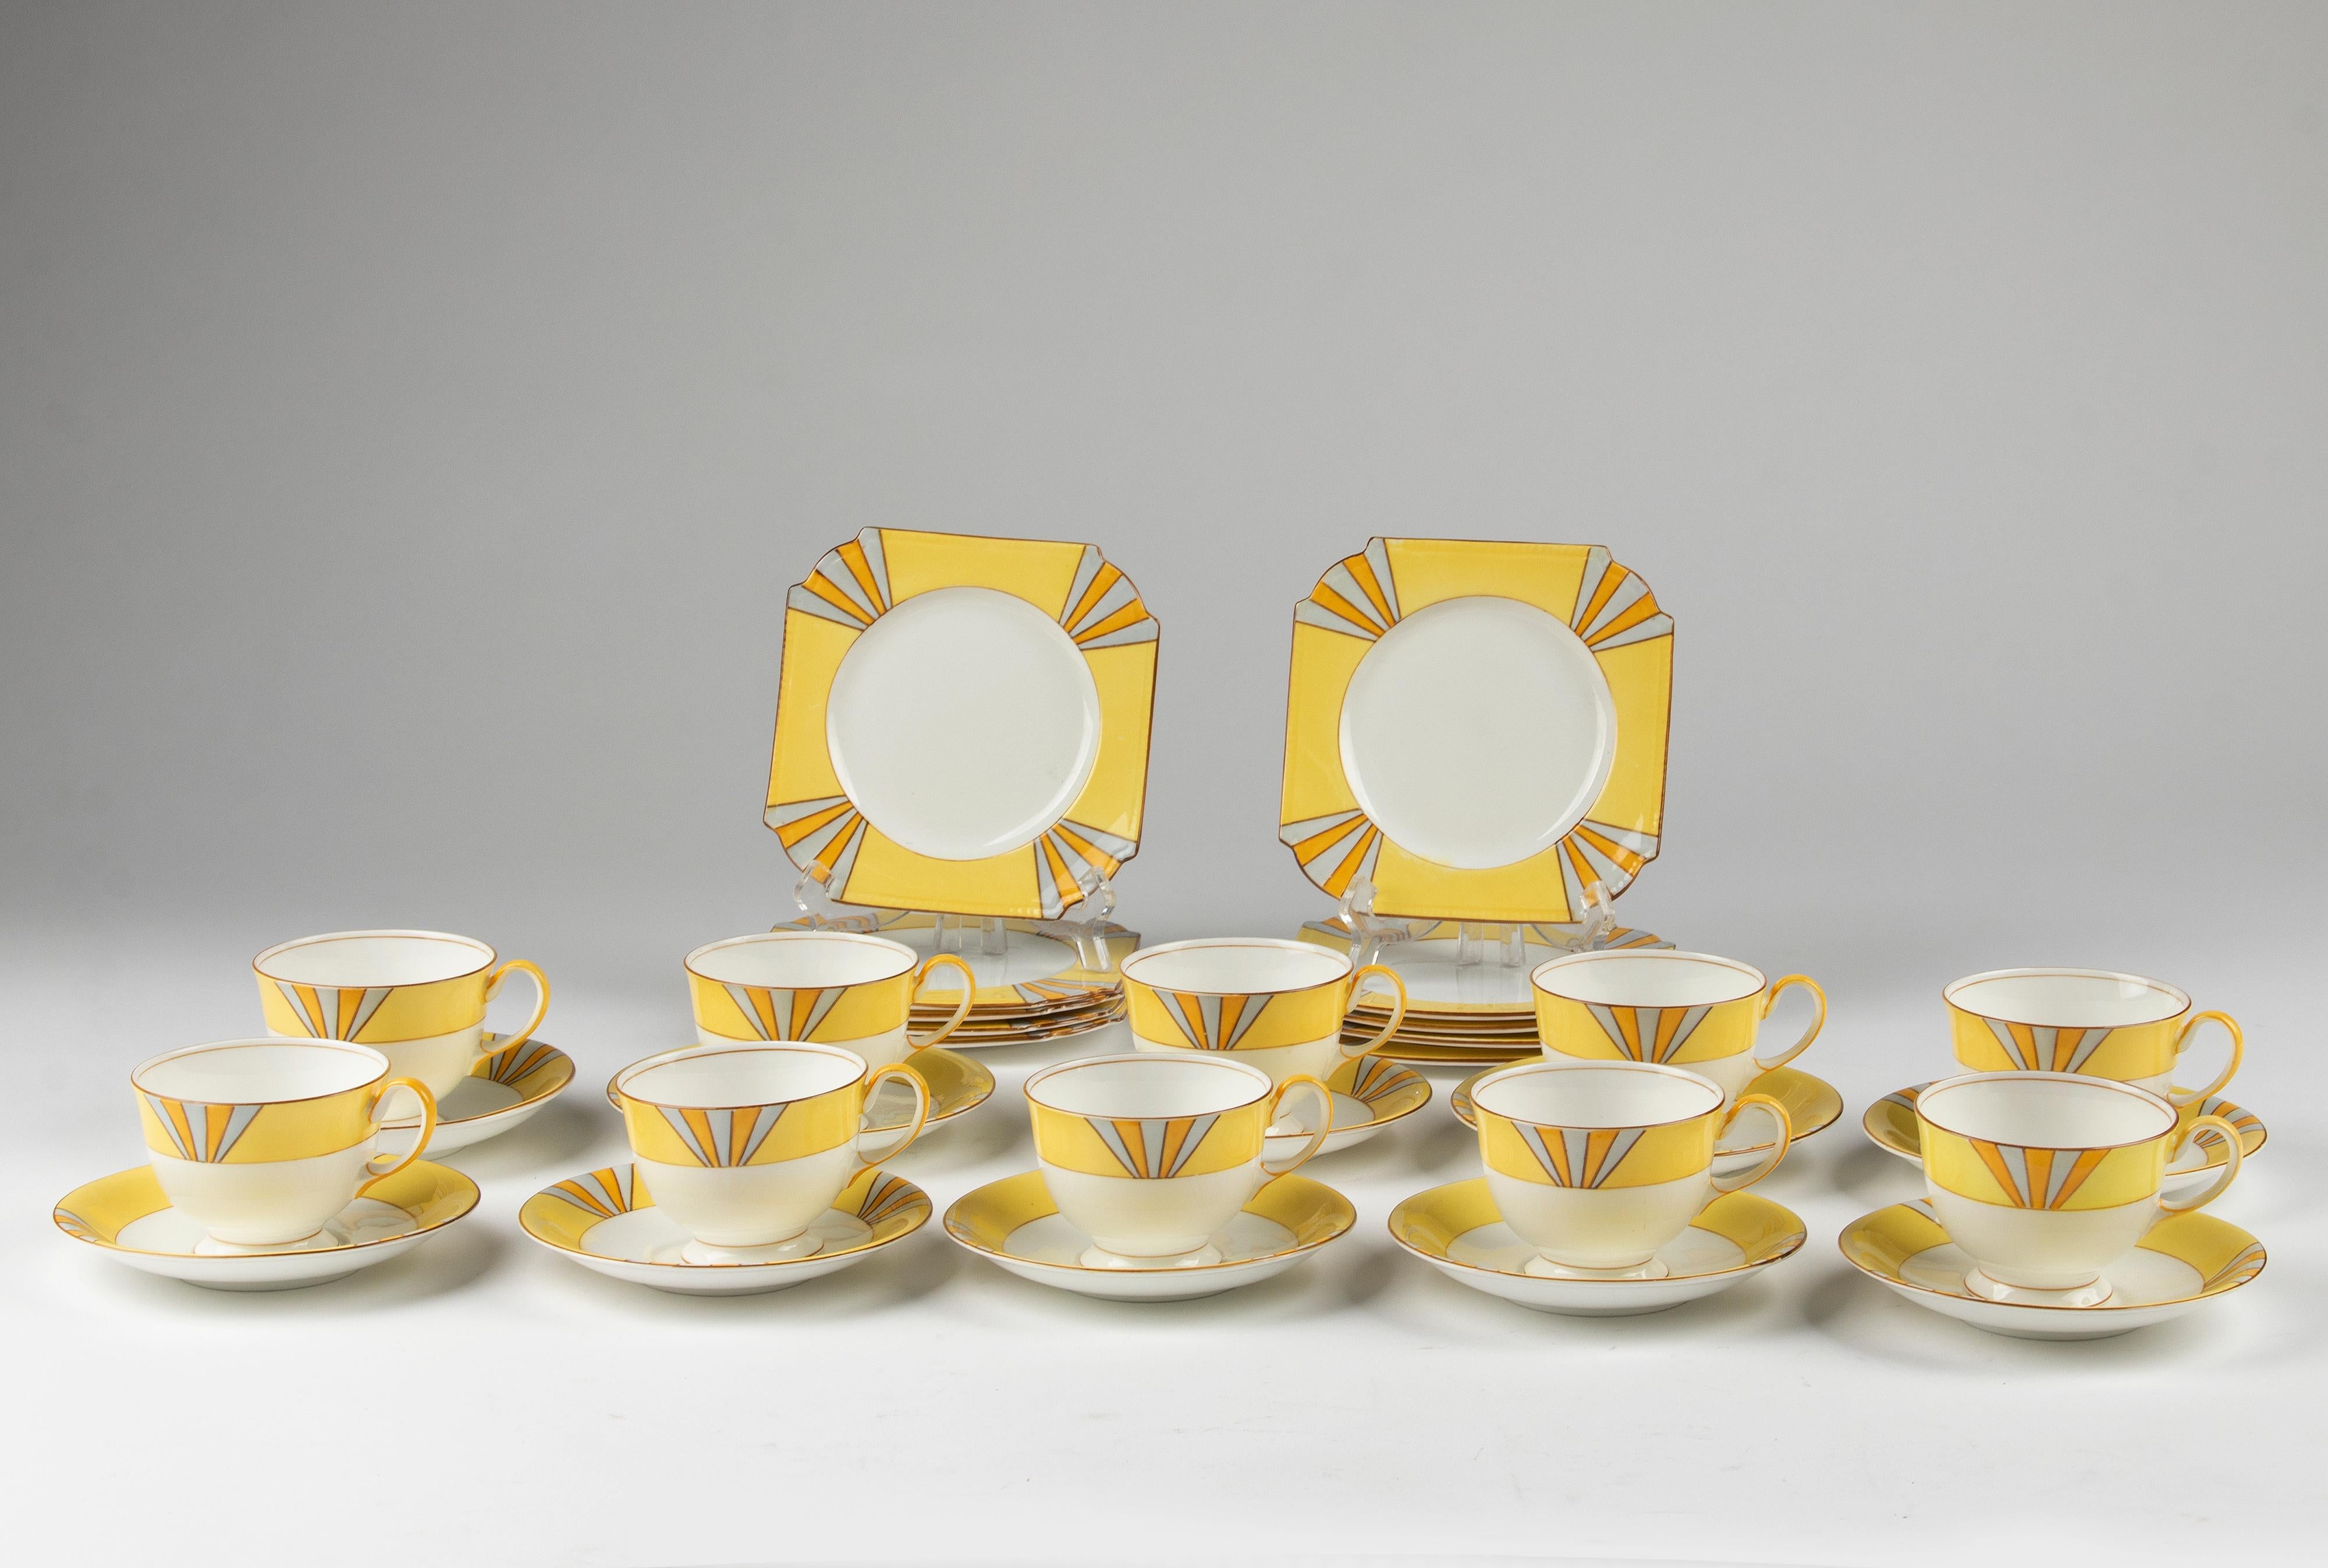 A lovely set of 10 Art Deco tea trio's, made by the English brand Aynsley. Nicely square shaped cake plates, decorated with cheerful yellow colors. 
The cake plates are 15 x 15 cm. The cups have quite a nice size, they are 6,5 cm tall and Ø8,5 cm.